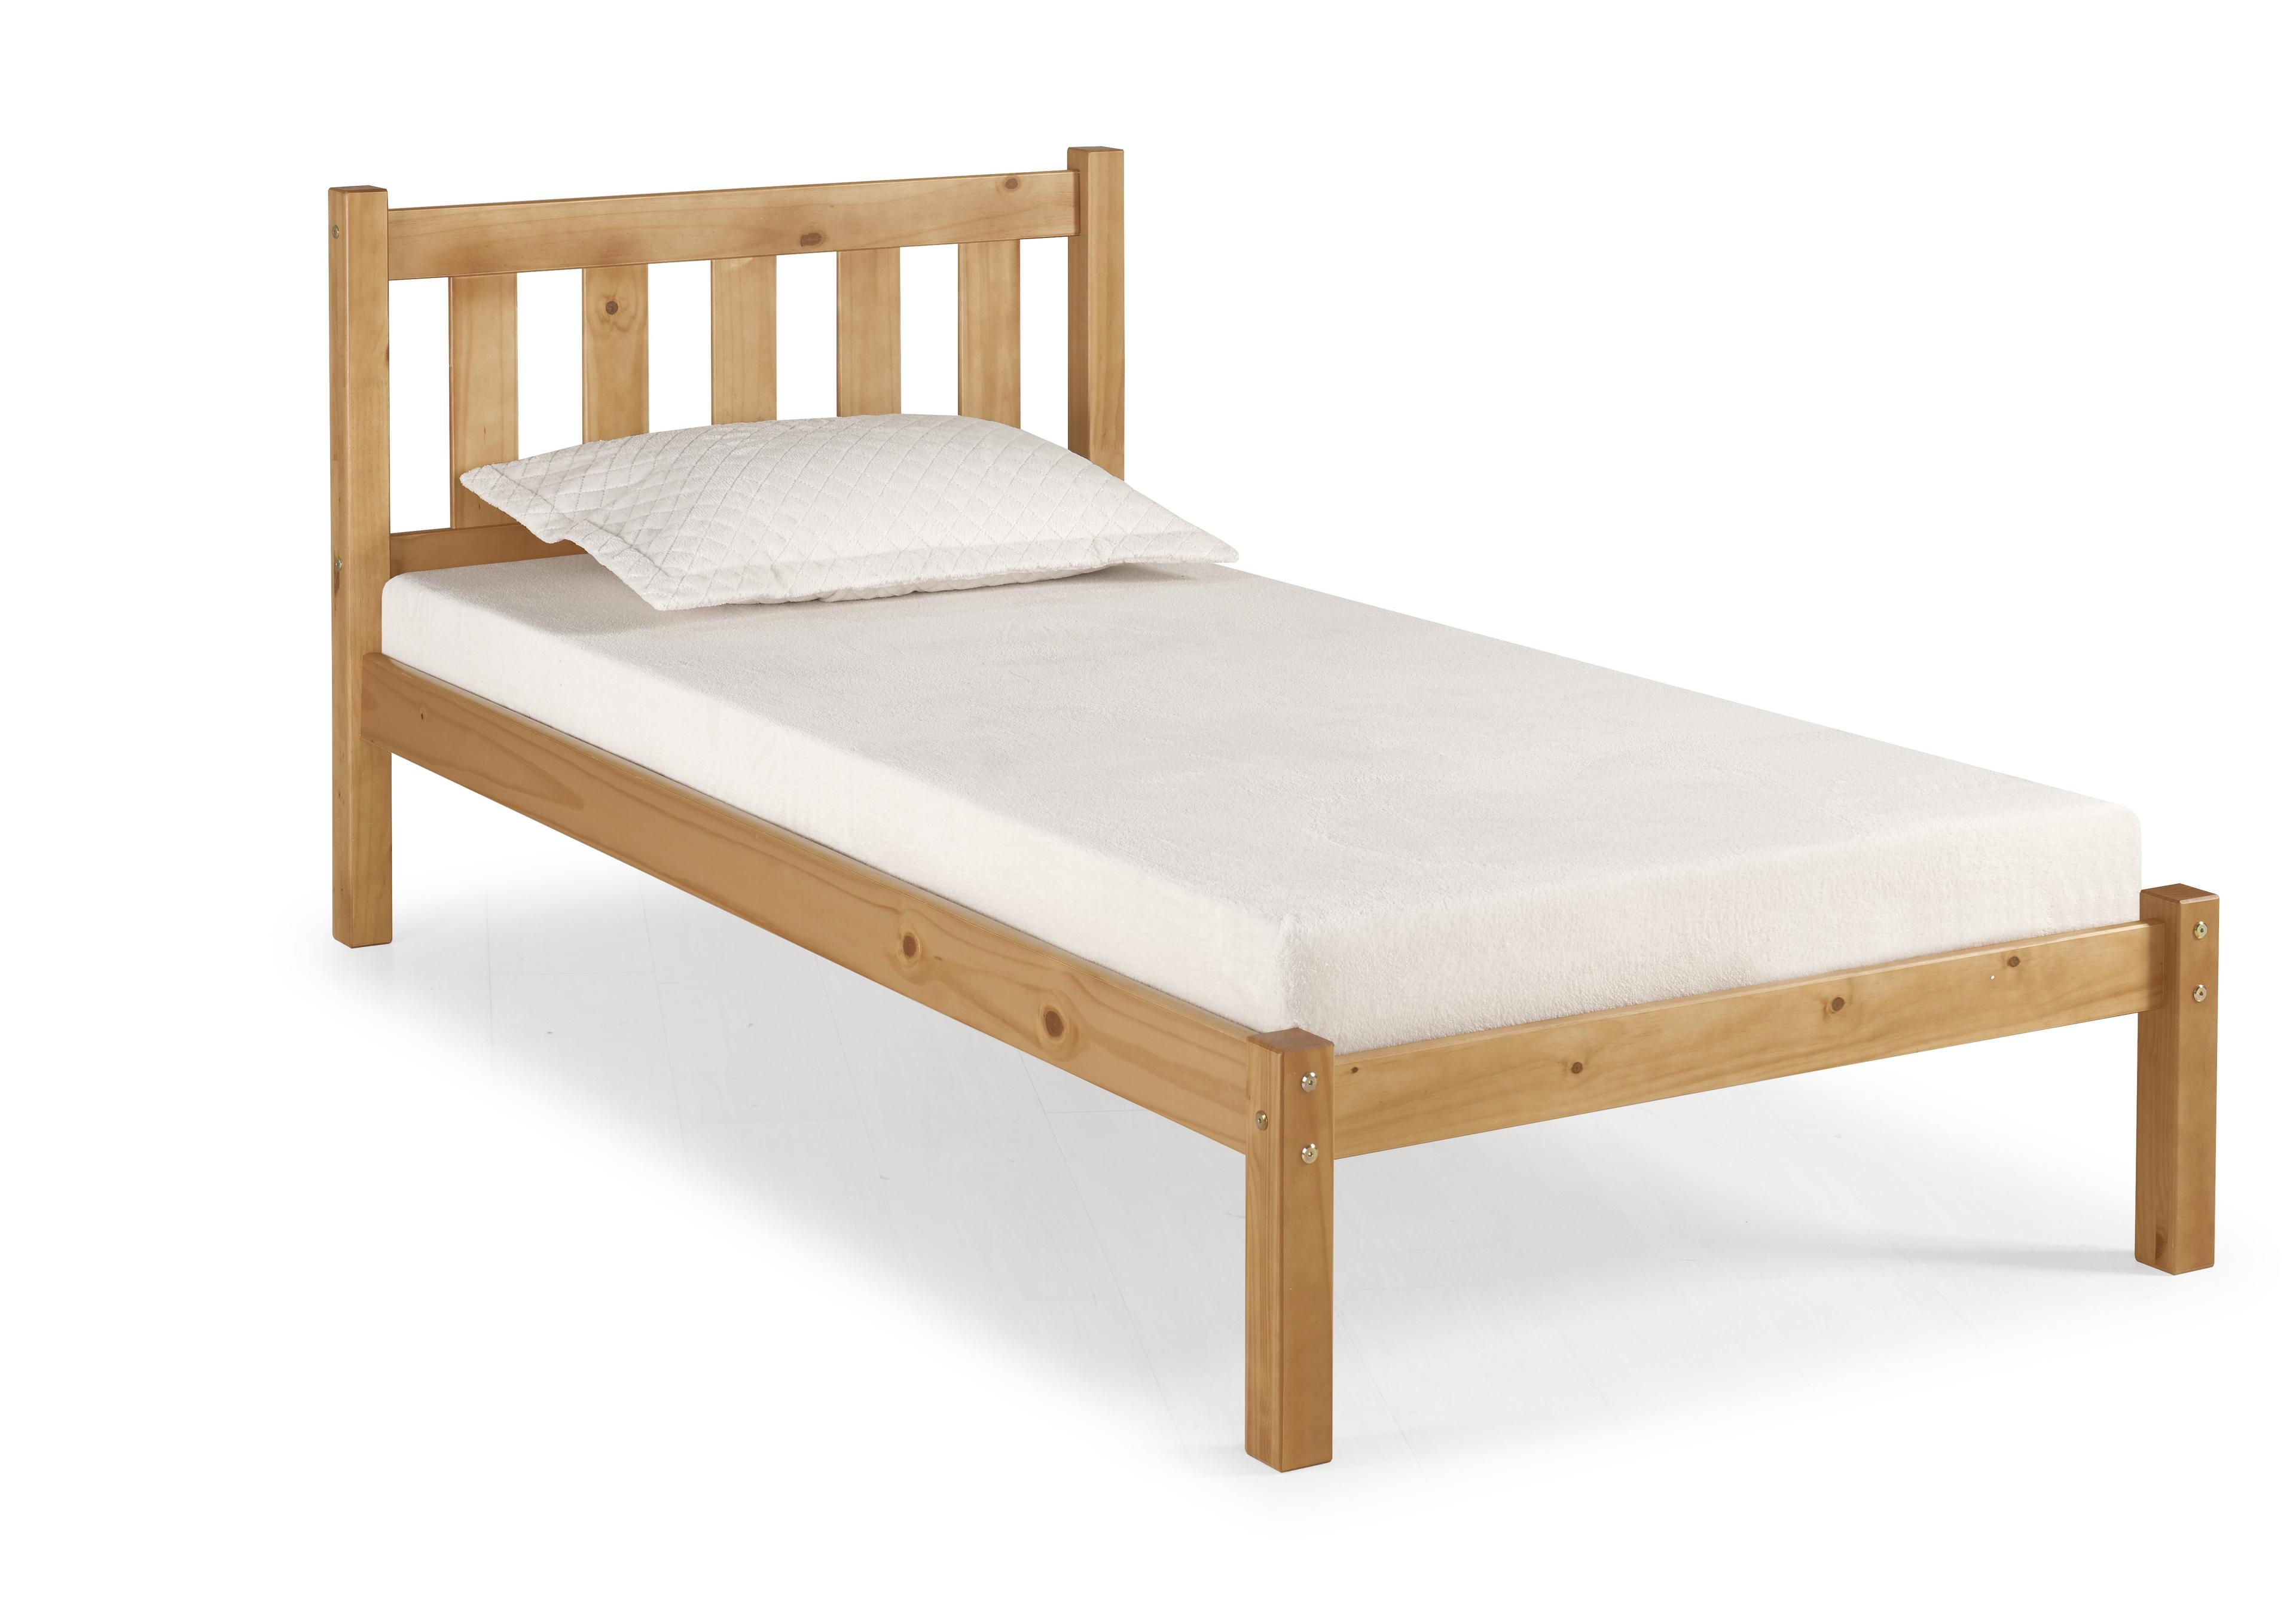 Poppy Twin Platform Bed with Slatted Headboard and Storage Drawers, Cinnamon Pine